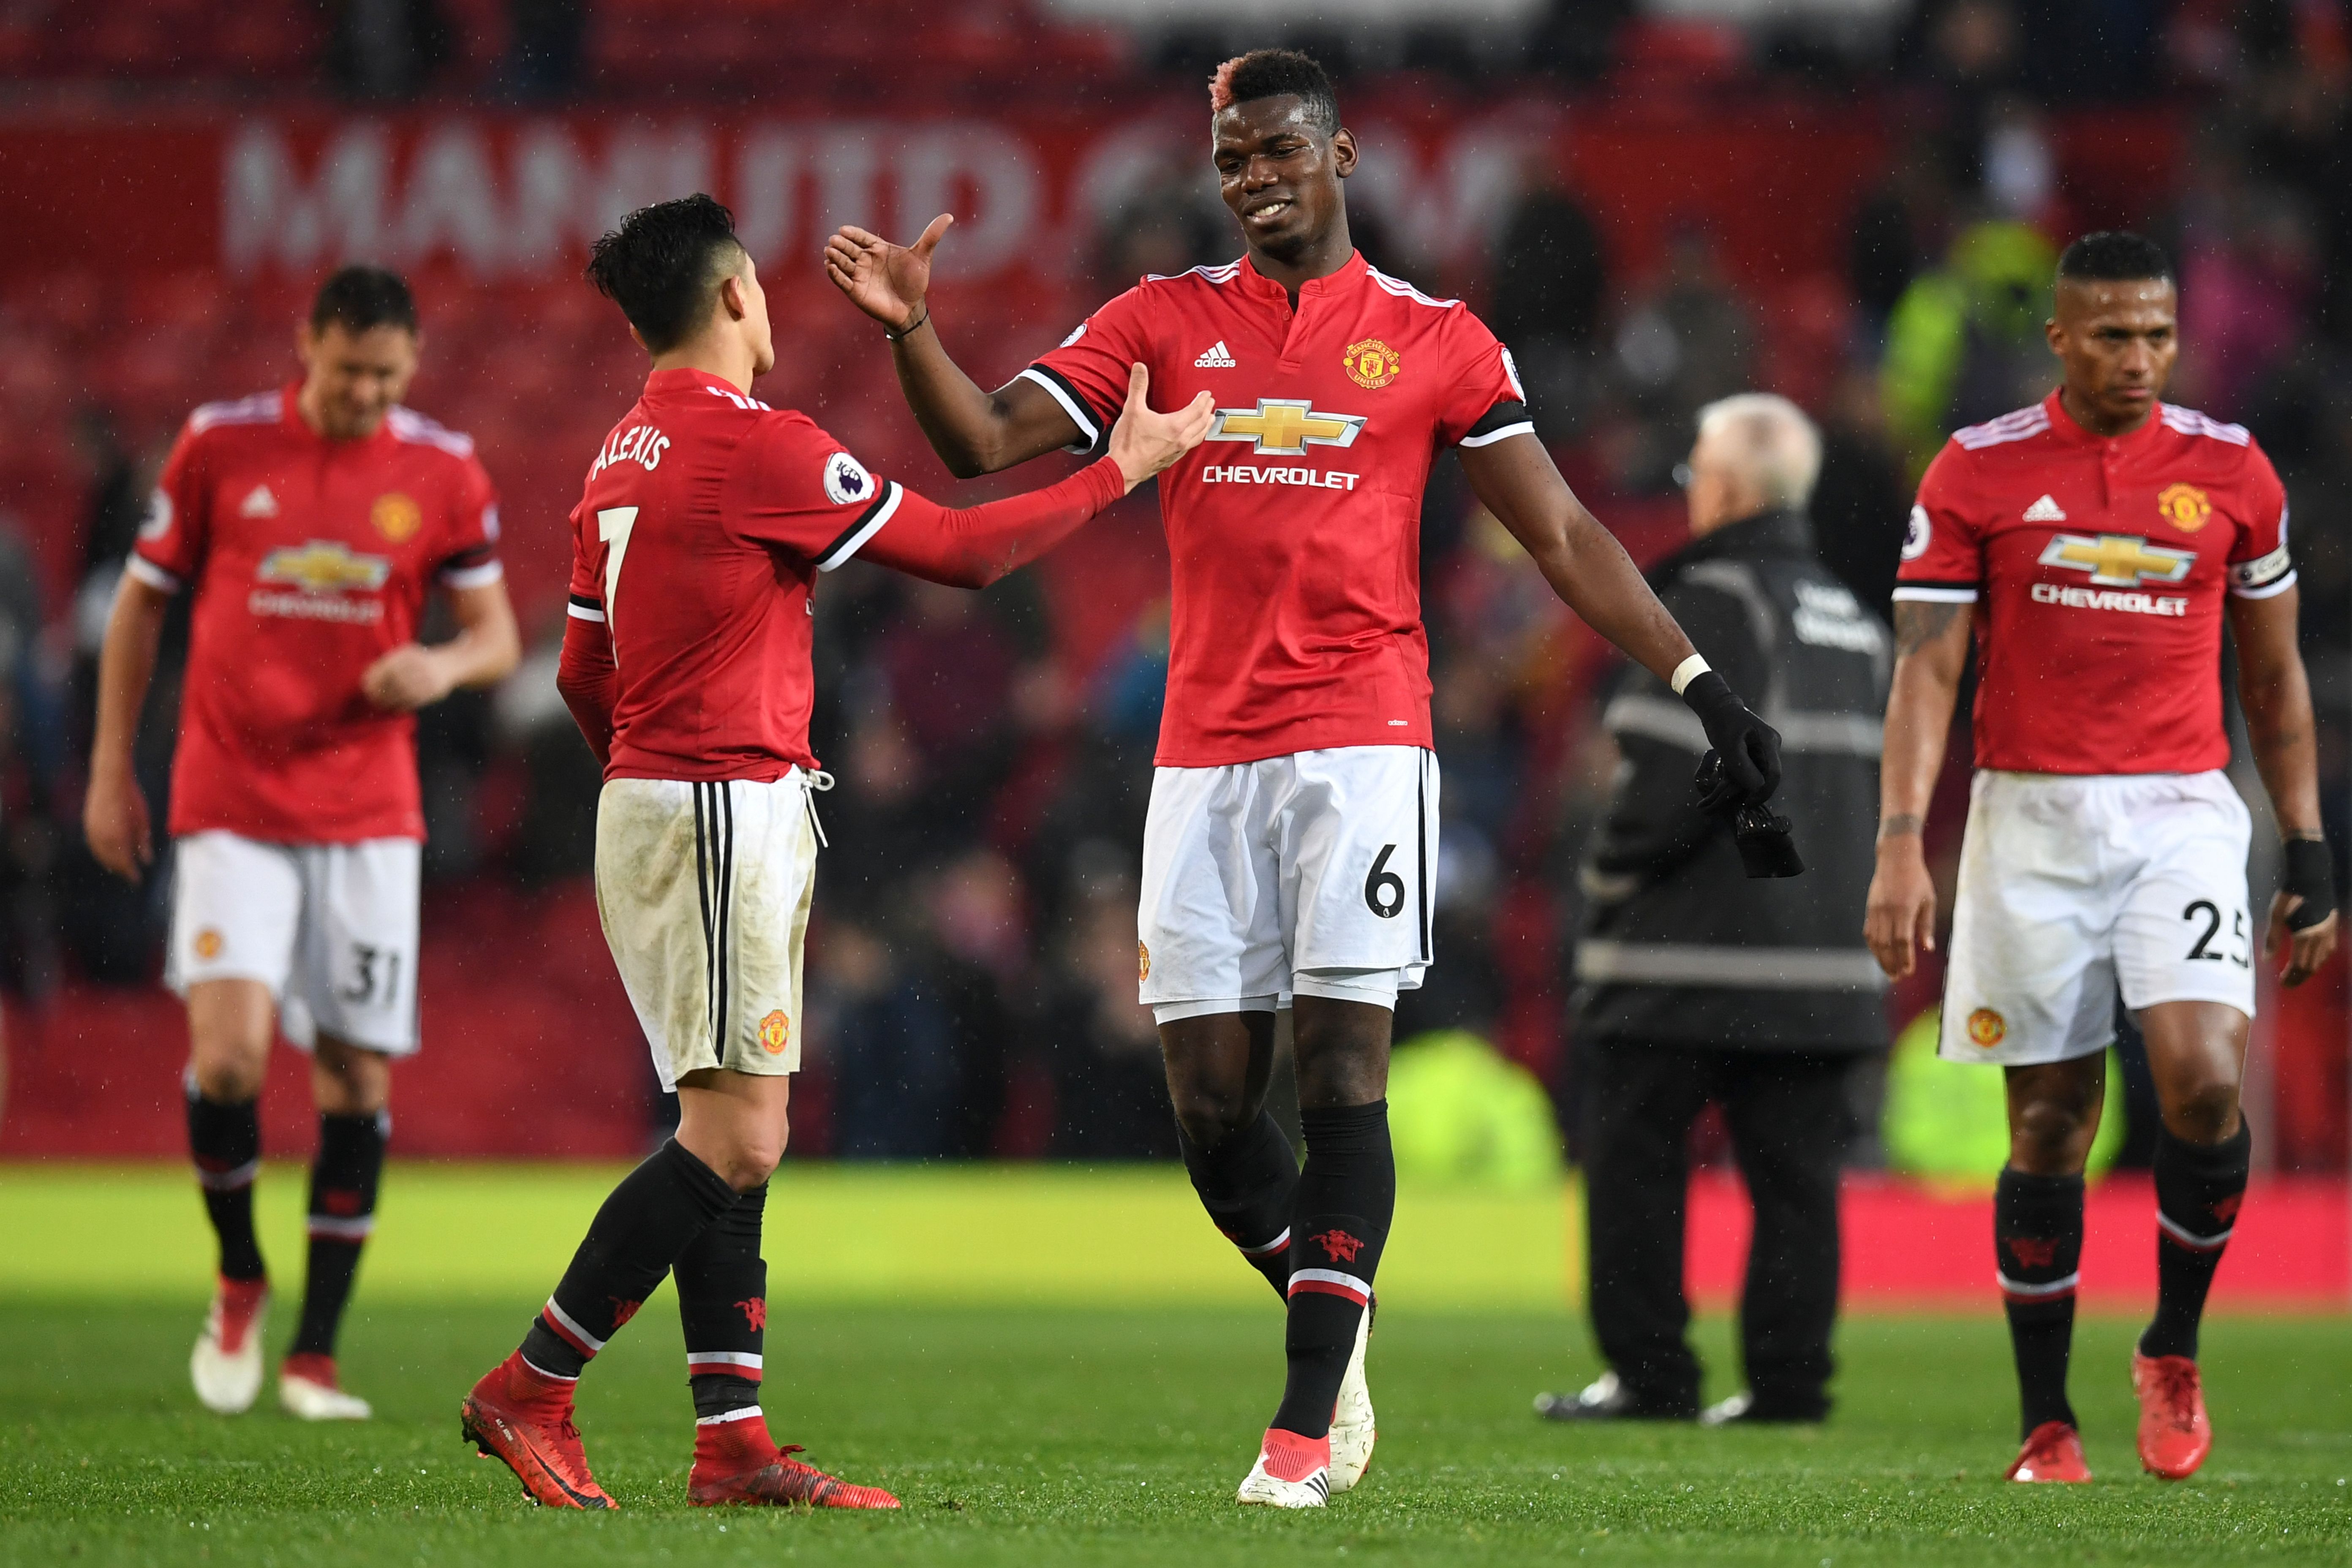 Manchester United's Chilean striker Alexis Sanchez (L) shakes hands with Manchester United's French midfielder Paul Pogba (R) at the end of the English Premier League football match between Manchester United and Huddersfield Town at Old Trafford in Manchester, north west England, on February 3, 2018. / AFP PHOTO / Paul ELLIS / RESTRICTED TO EDITORIAL USE. No use with unauthorized audio, video, data, fixture lists, club/league logos or 'live' services. Online in-match use limited to 75 images, no video emulation. No use in betting, games or single club/league/player publications.  /         (Photo credit should read PAUL ELLIS/AFP/Getty Images)